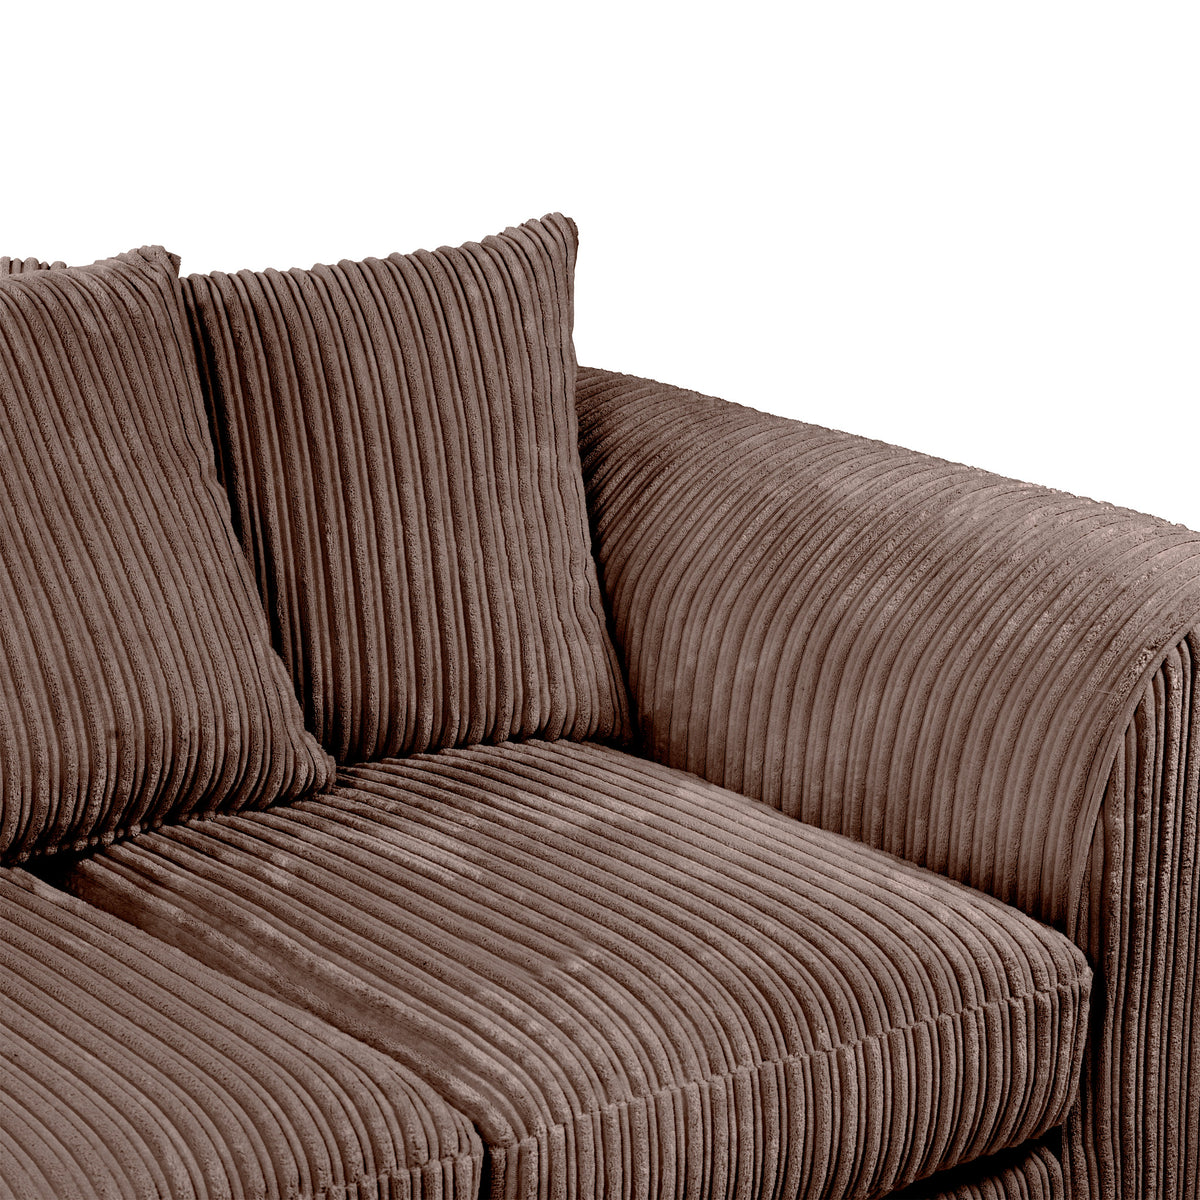 Bletchley Chocolate Jumbo Cord 3 Seater Sofa from Roseland Furniture